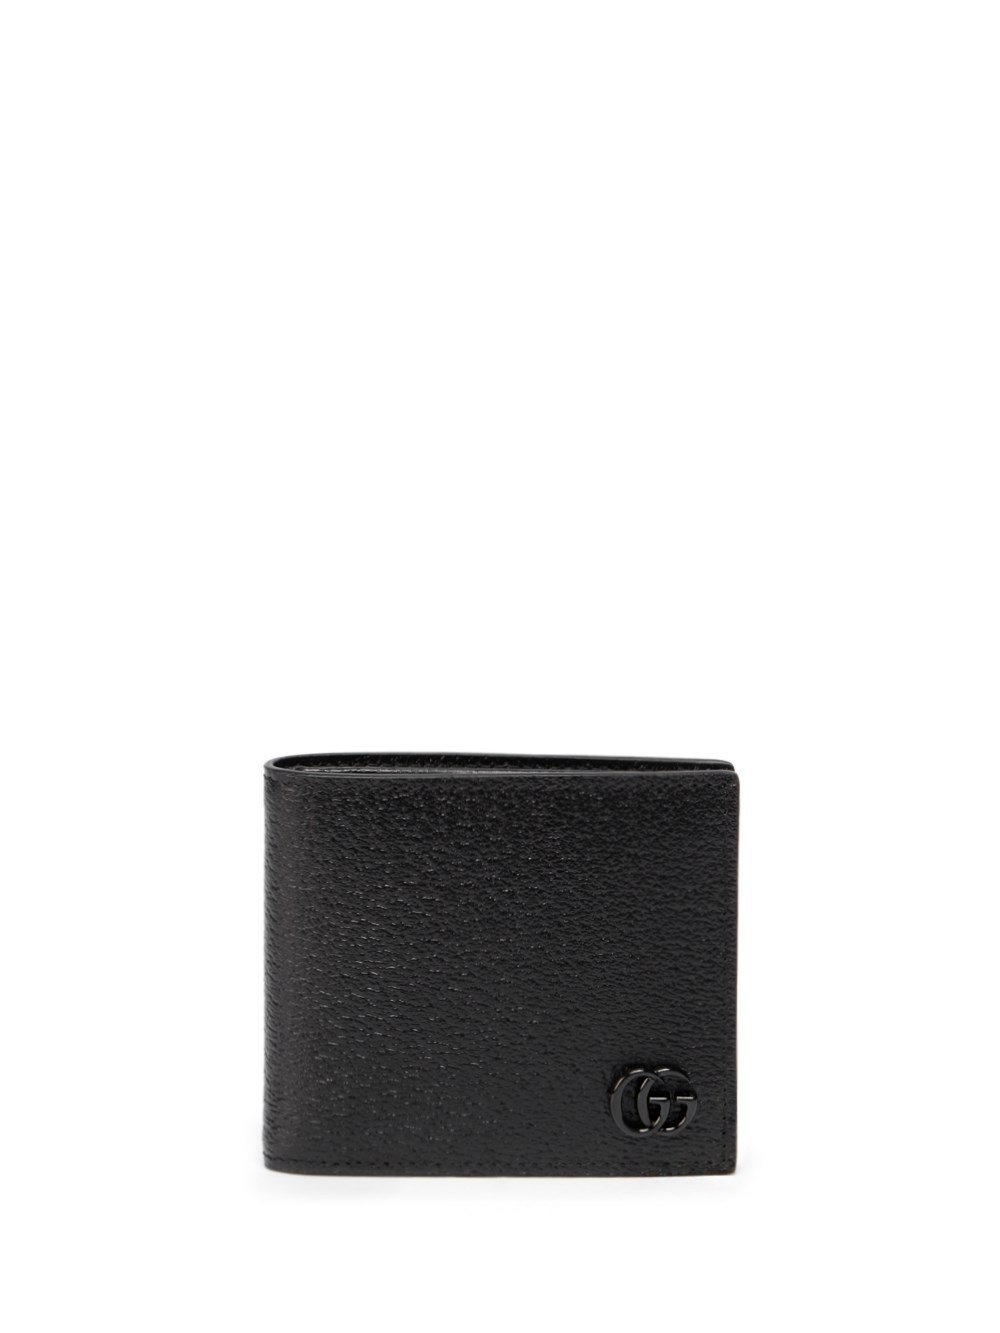 GUCCI `GG MARMONT` LEATHER BI-FOLD WALLET